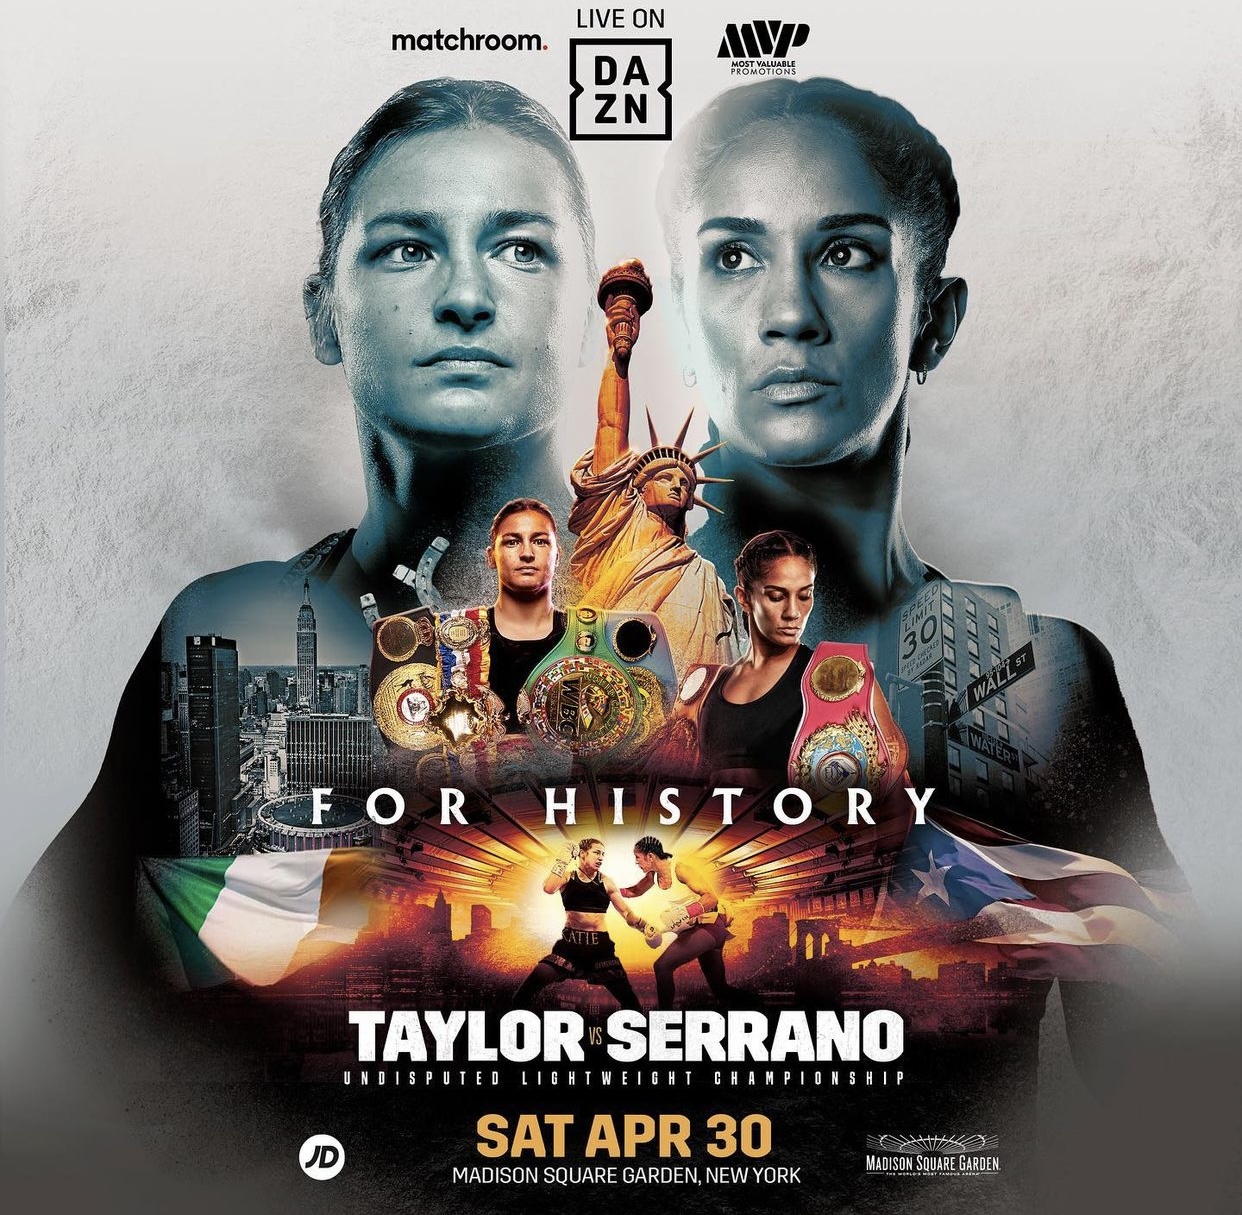 Taylor-Serrano confirmed on April 30 at Madison Square Garden